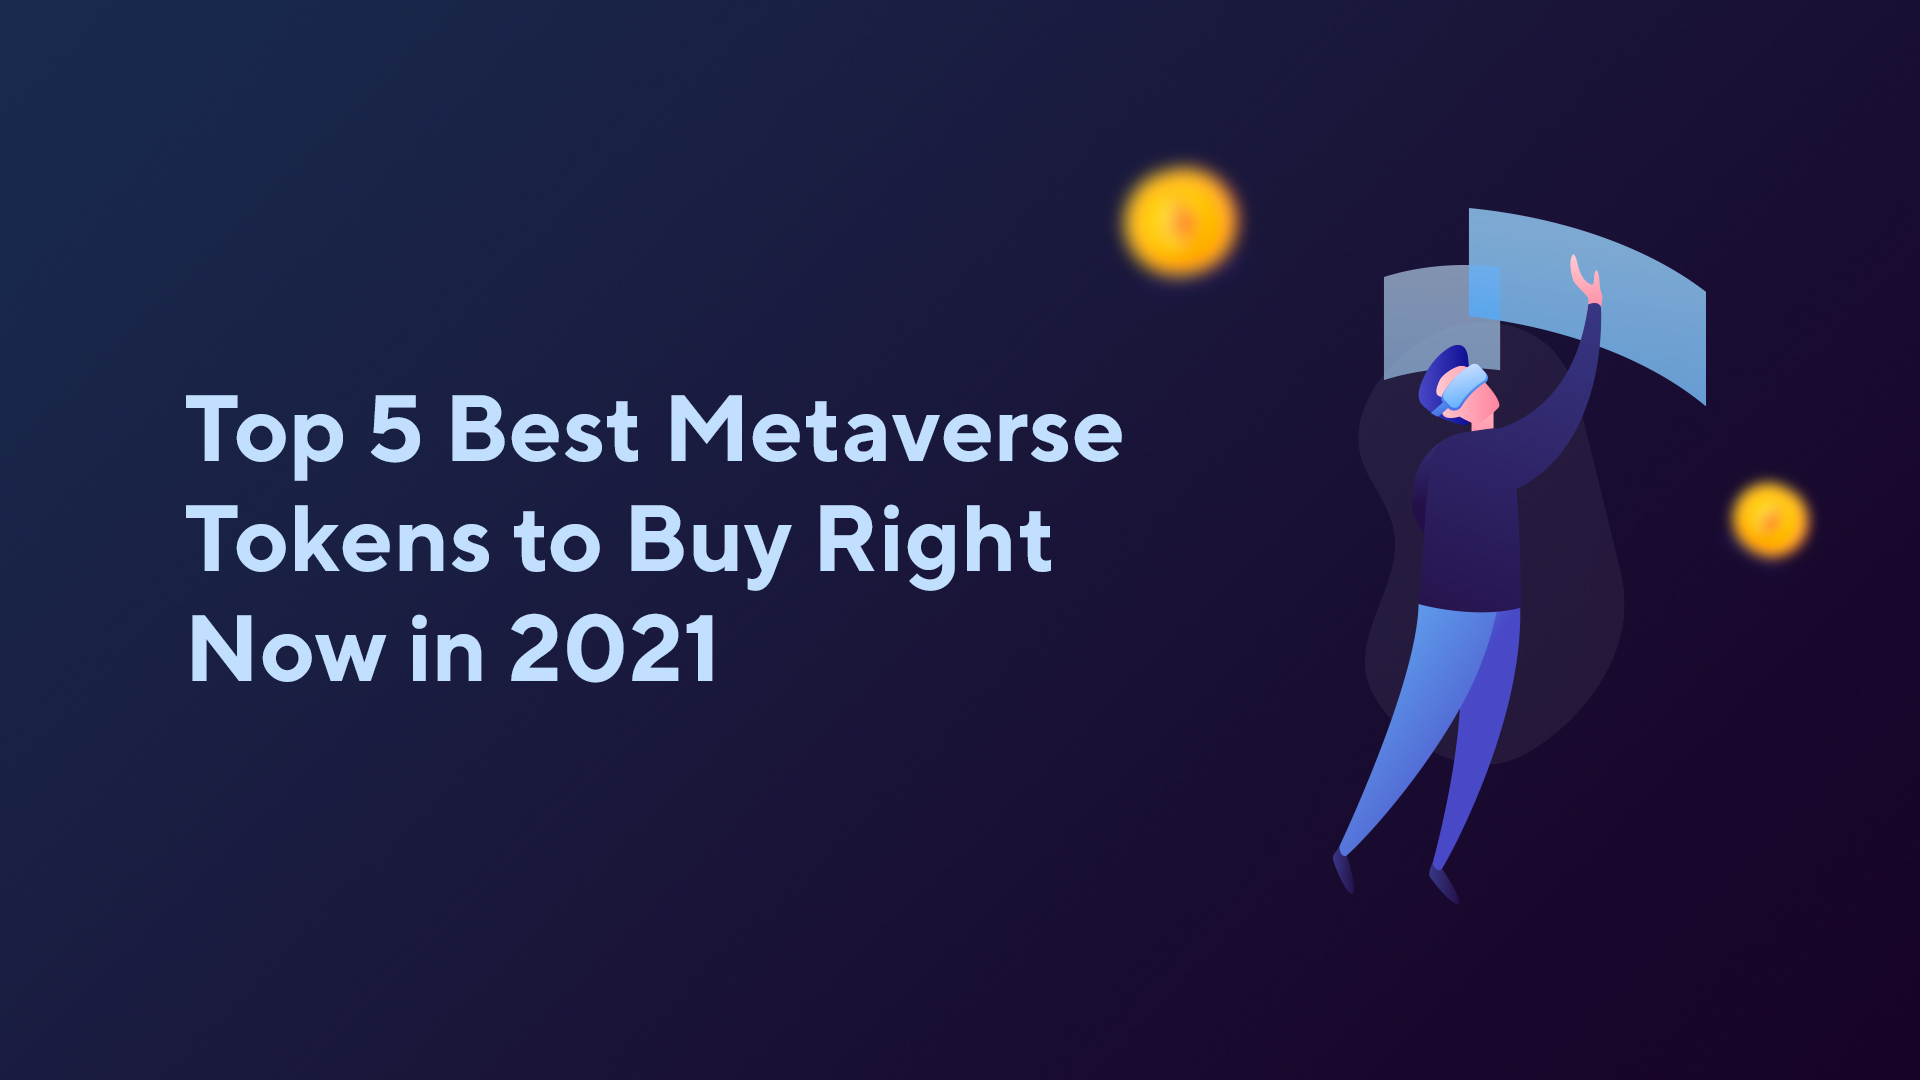 Top 5 Best Metaverse Tokens to Buy Right Now in 2021